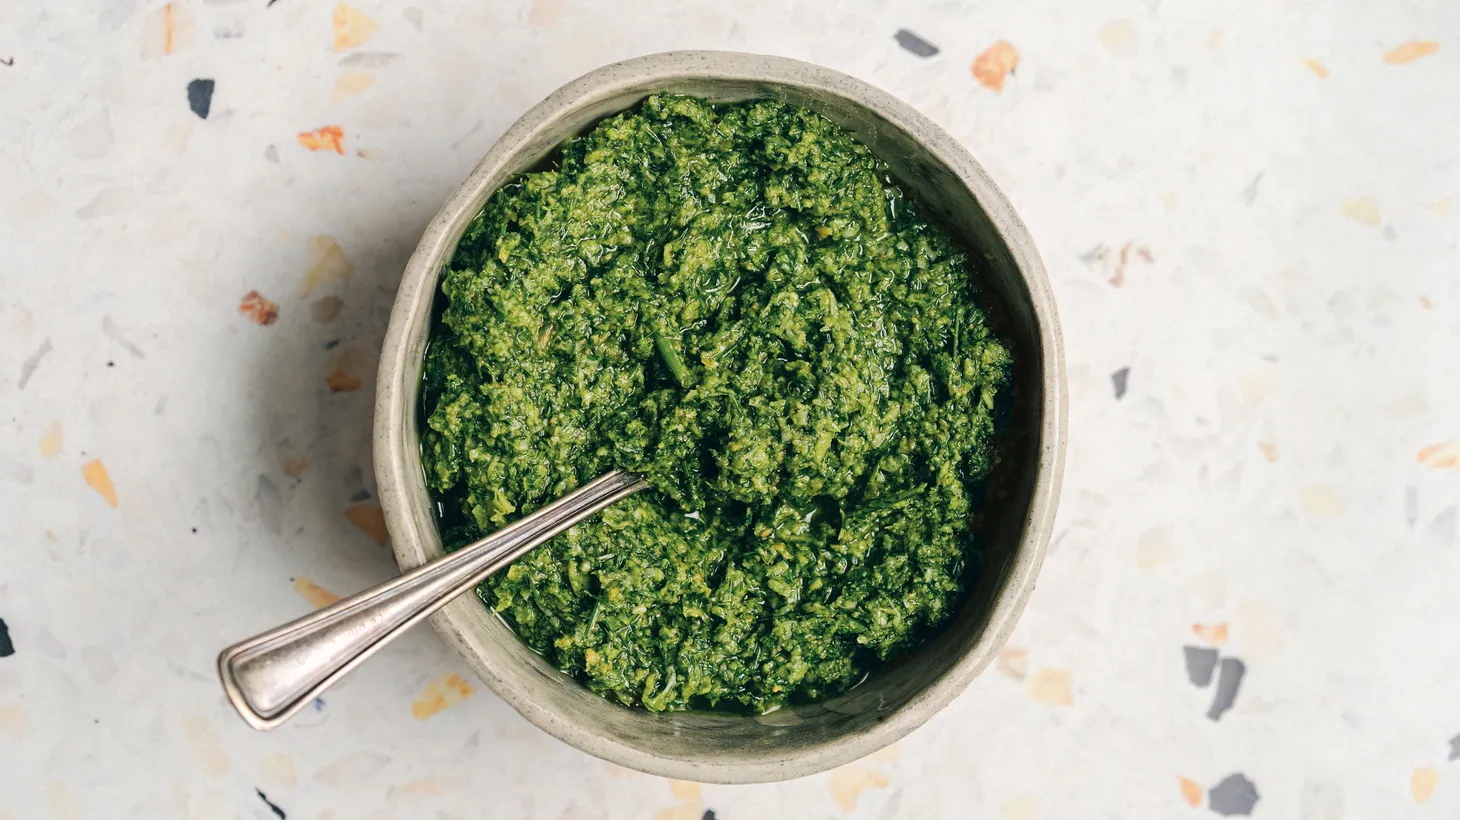 Fennel frond pesto is a way to use the entire plant and has more texture and "grassiness" than its traditional basil counterpart.